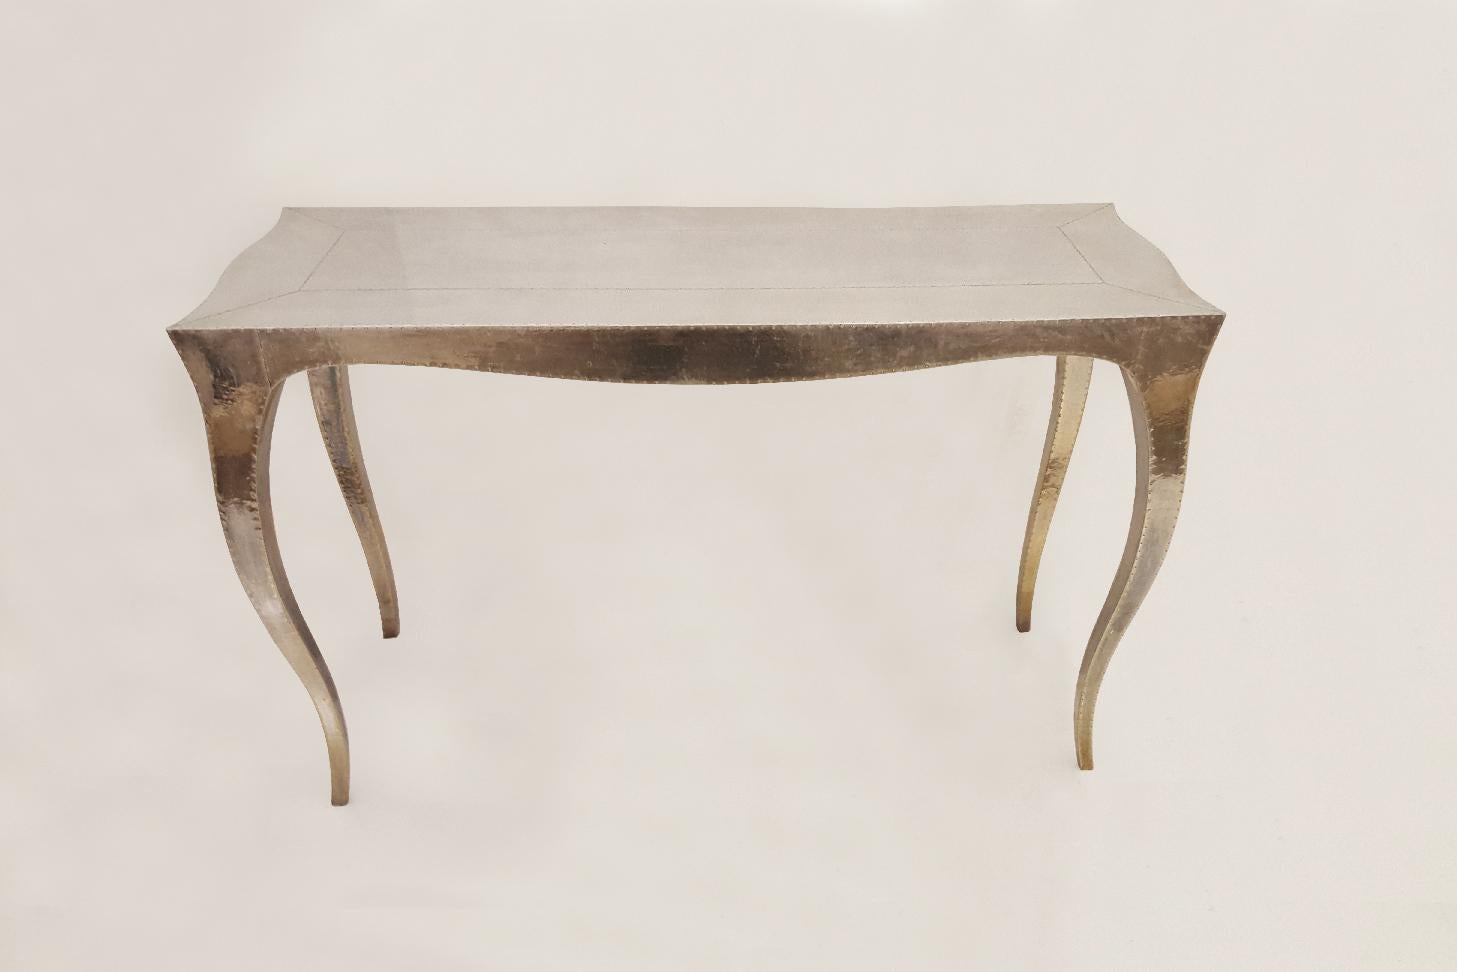 Louise Console Art Nouveau Tray Table Mid. Hammered White Bronze by Paul Mathieu For Sale 5